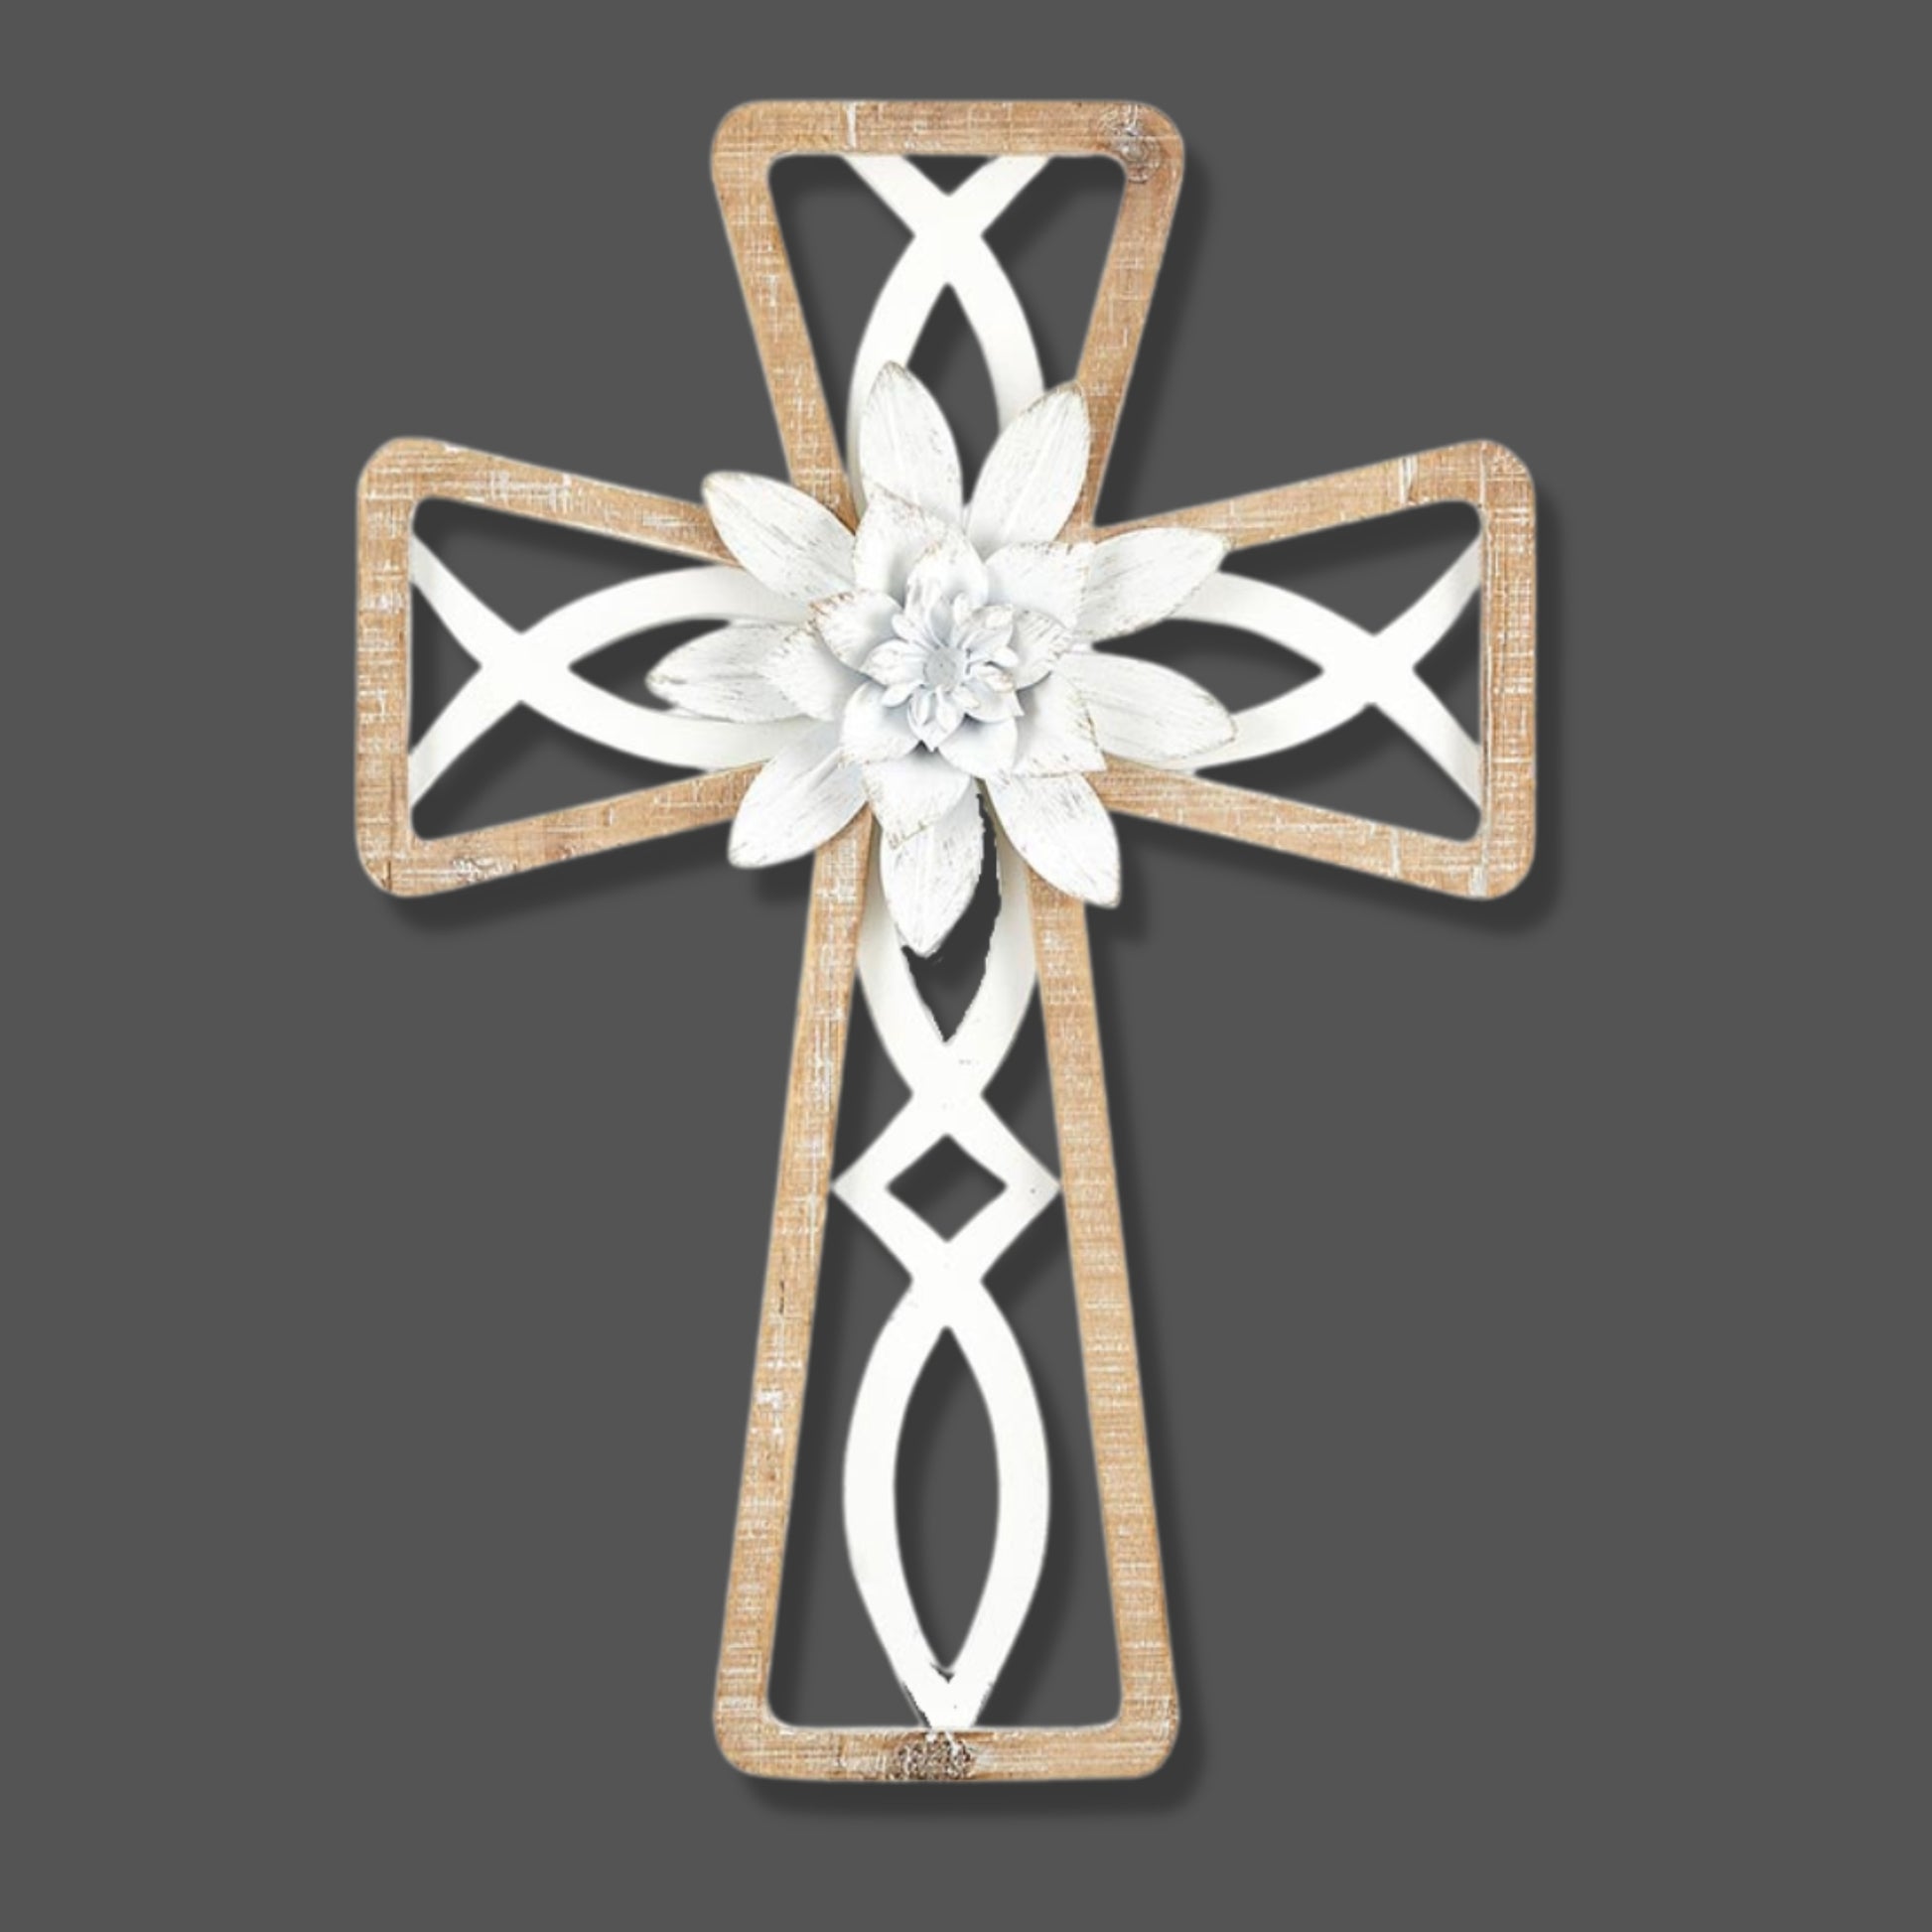 Wood Framed Ichthys (Icthus) Wall Cross - Fir and Metal Cross with White Metal Flower (14"H) shown on dark interior wall | INSIDE OUT | InsideOutCatalog.com